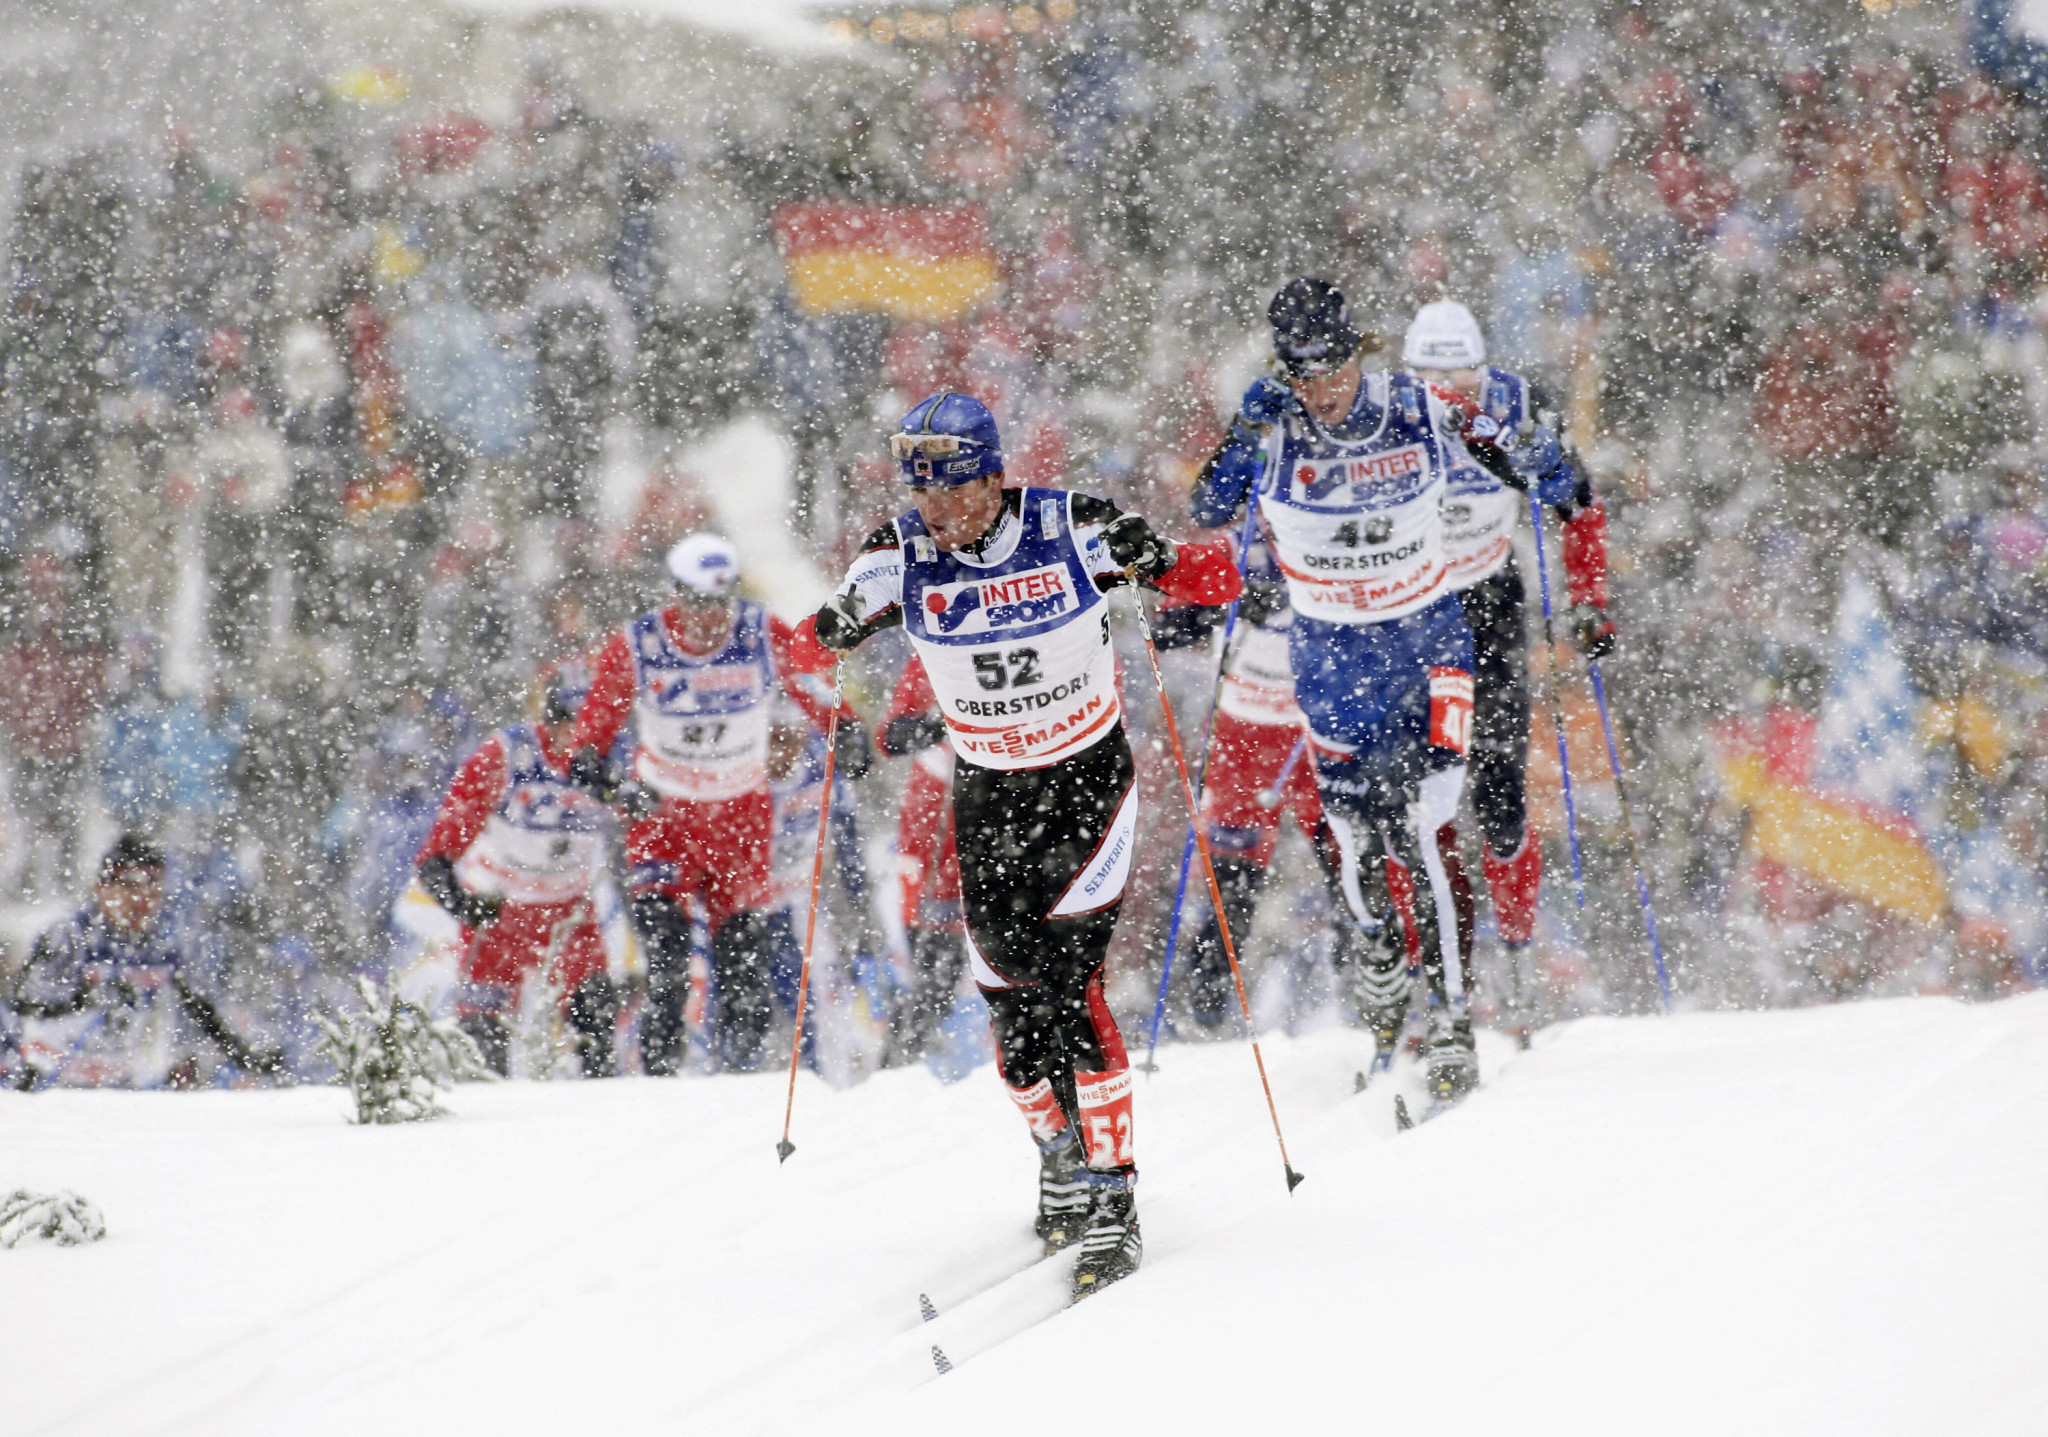 The FIS Nordic World Ski Championships were last held in Oberstdorf in 2005 ©Getty Images